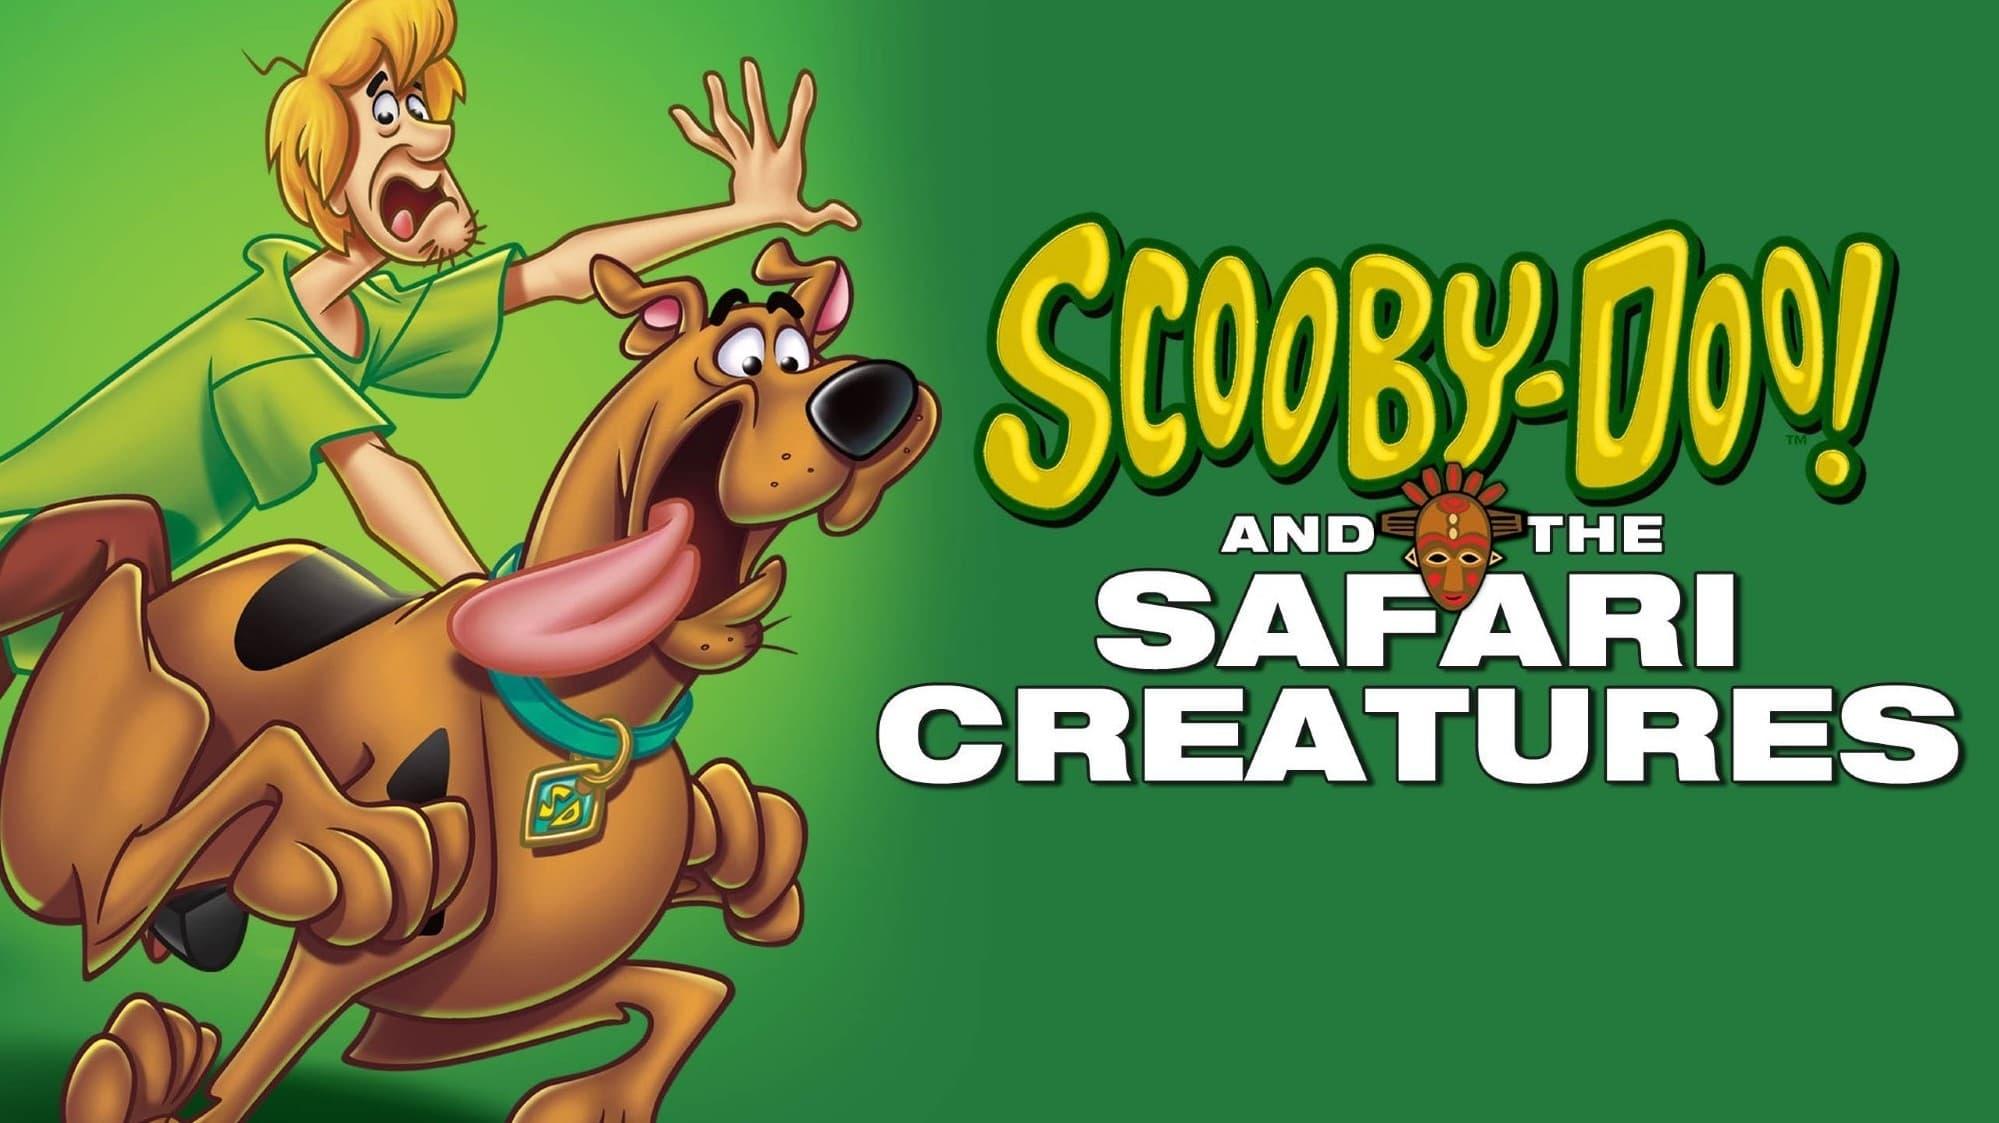 Scooby-Doo! and the Safari Creatures backdrop